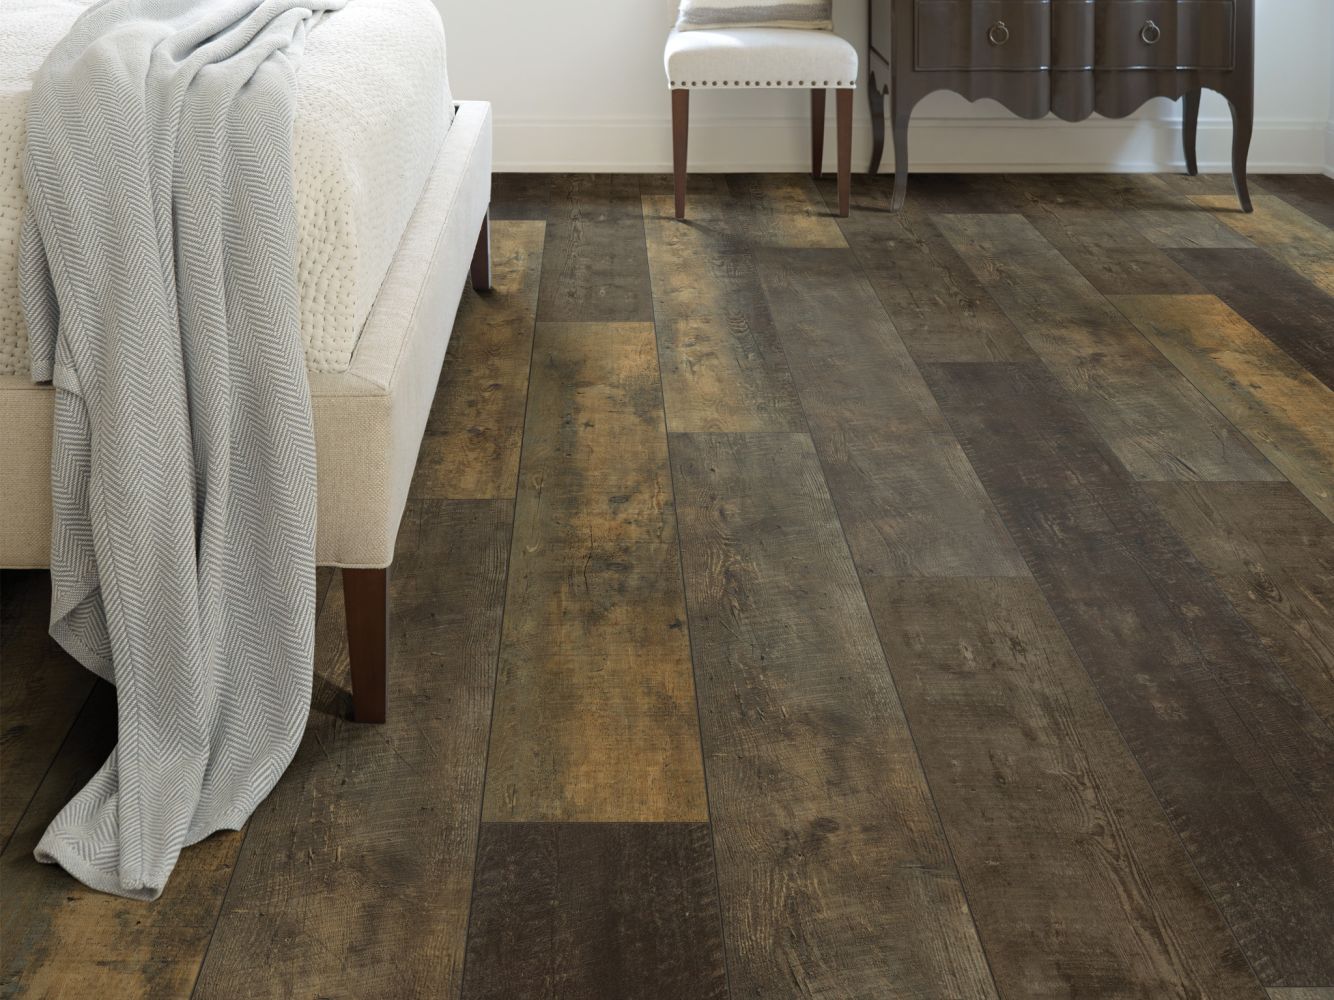 Shaw Floors Resilient Property Solutions Colossus HD + Timeless Barnboard 00194_VE243